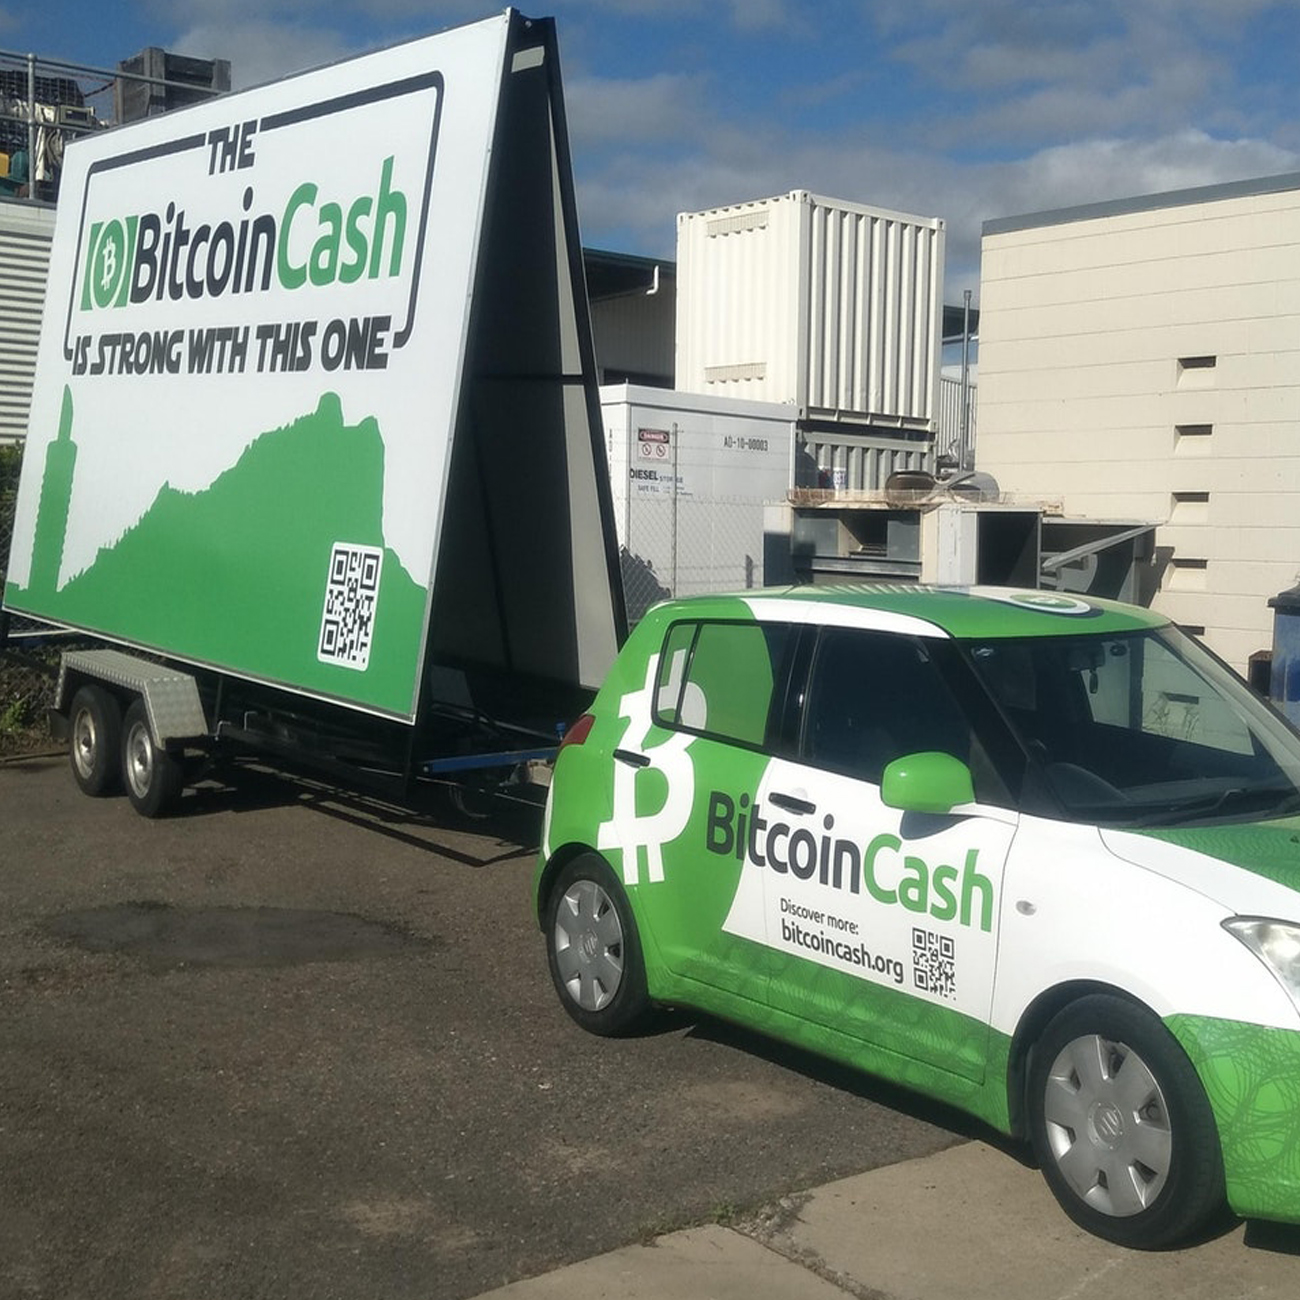 North Queensland is Becoming a Hub of BCH Accepting Businesses